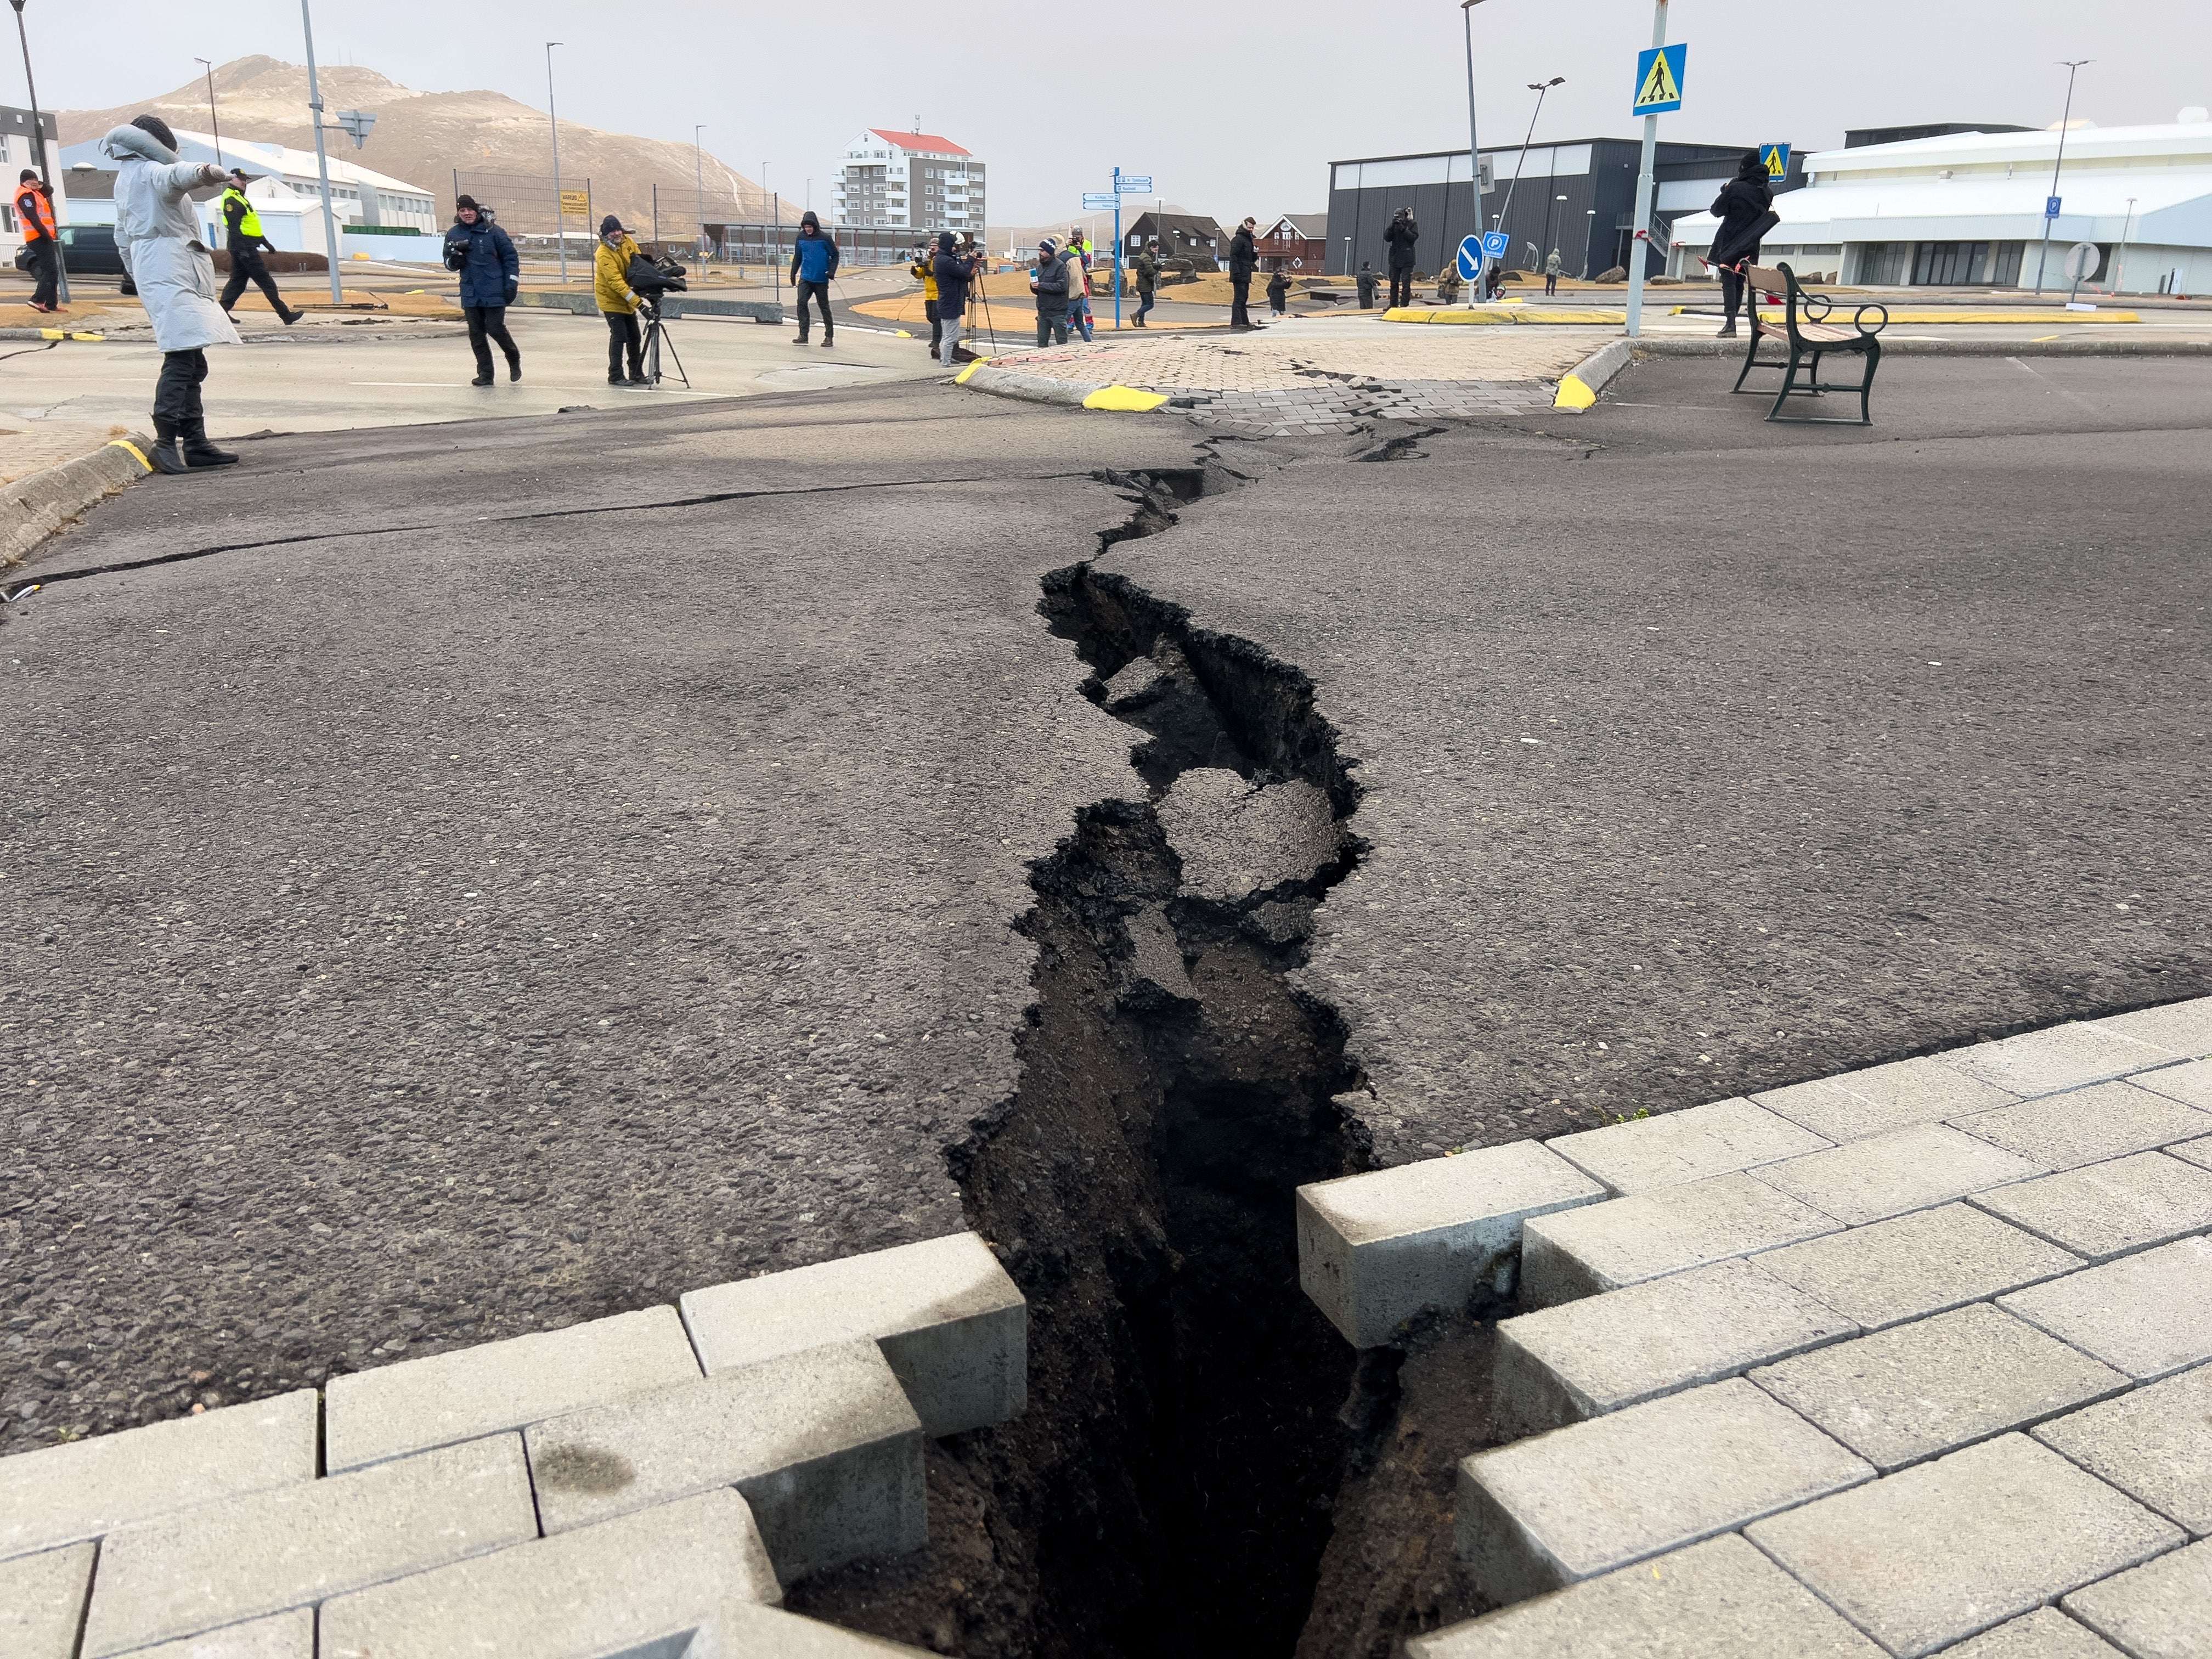 A large crack amid the road after the Icelandic town of Grindavik was shaken by earthquakes... and grammatical horror